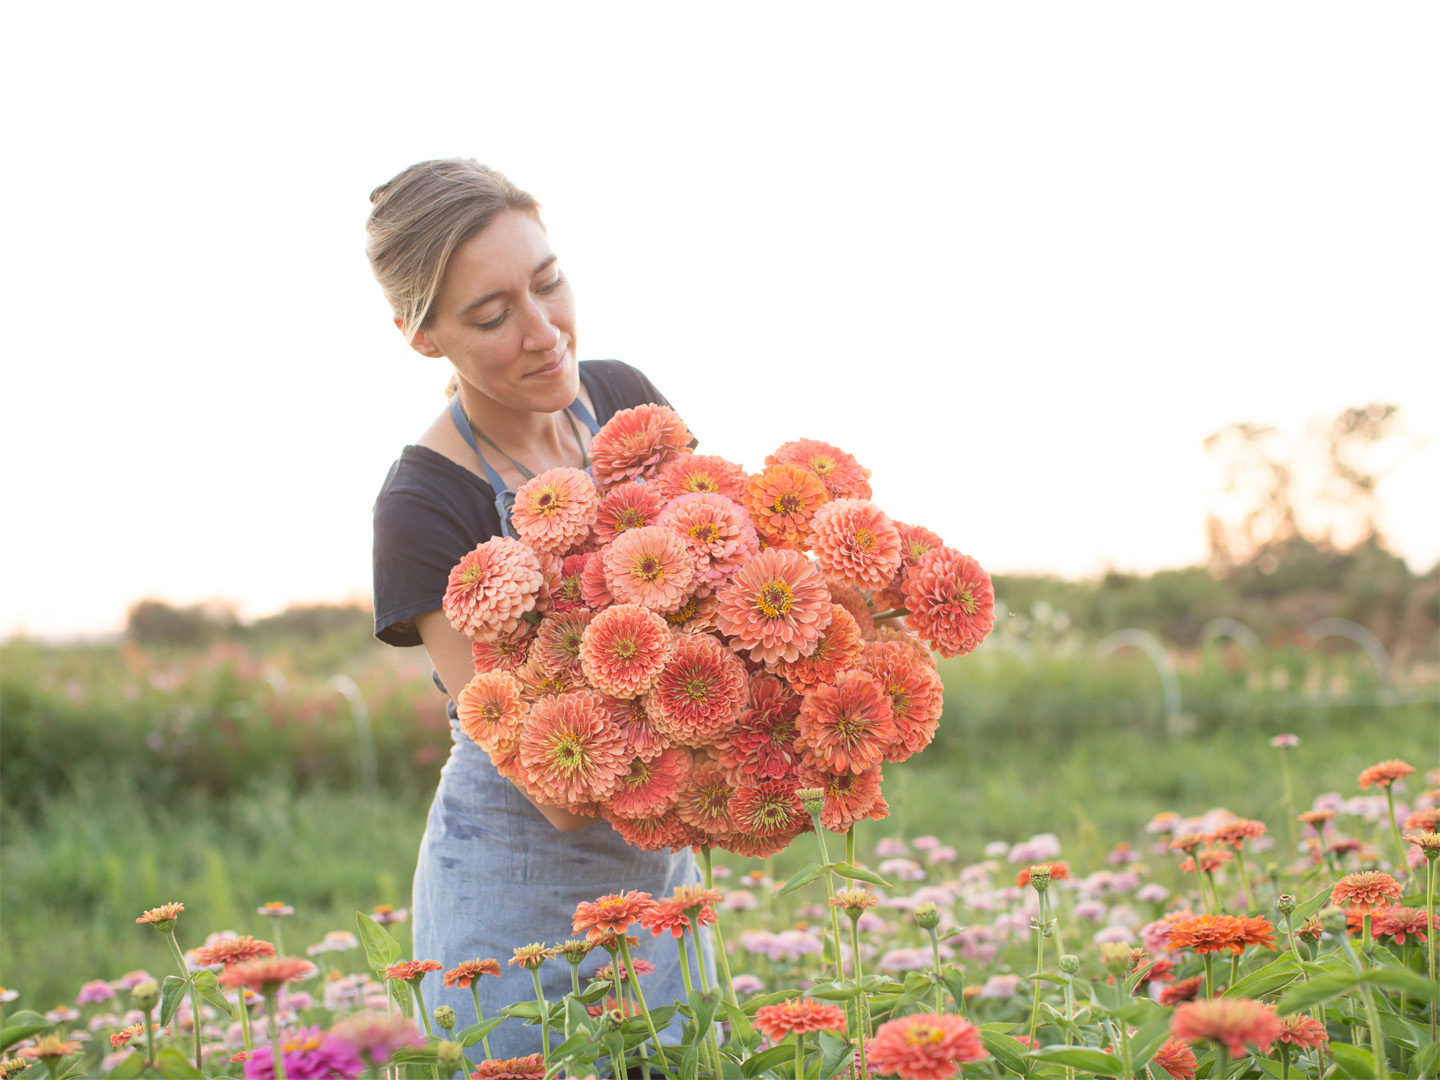 Erin Benzakein with an armload of zinnias in the Floret field